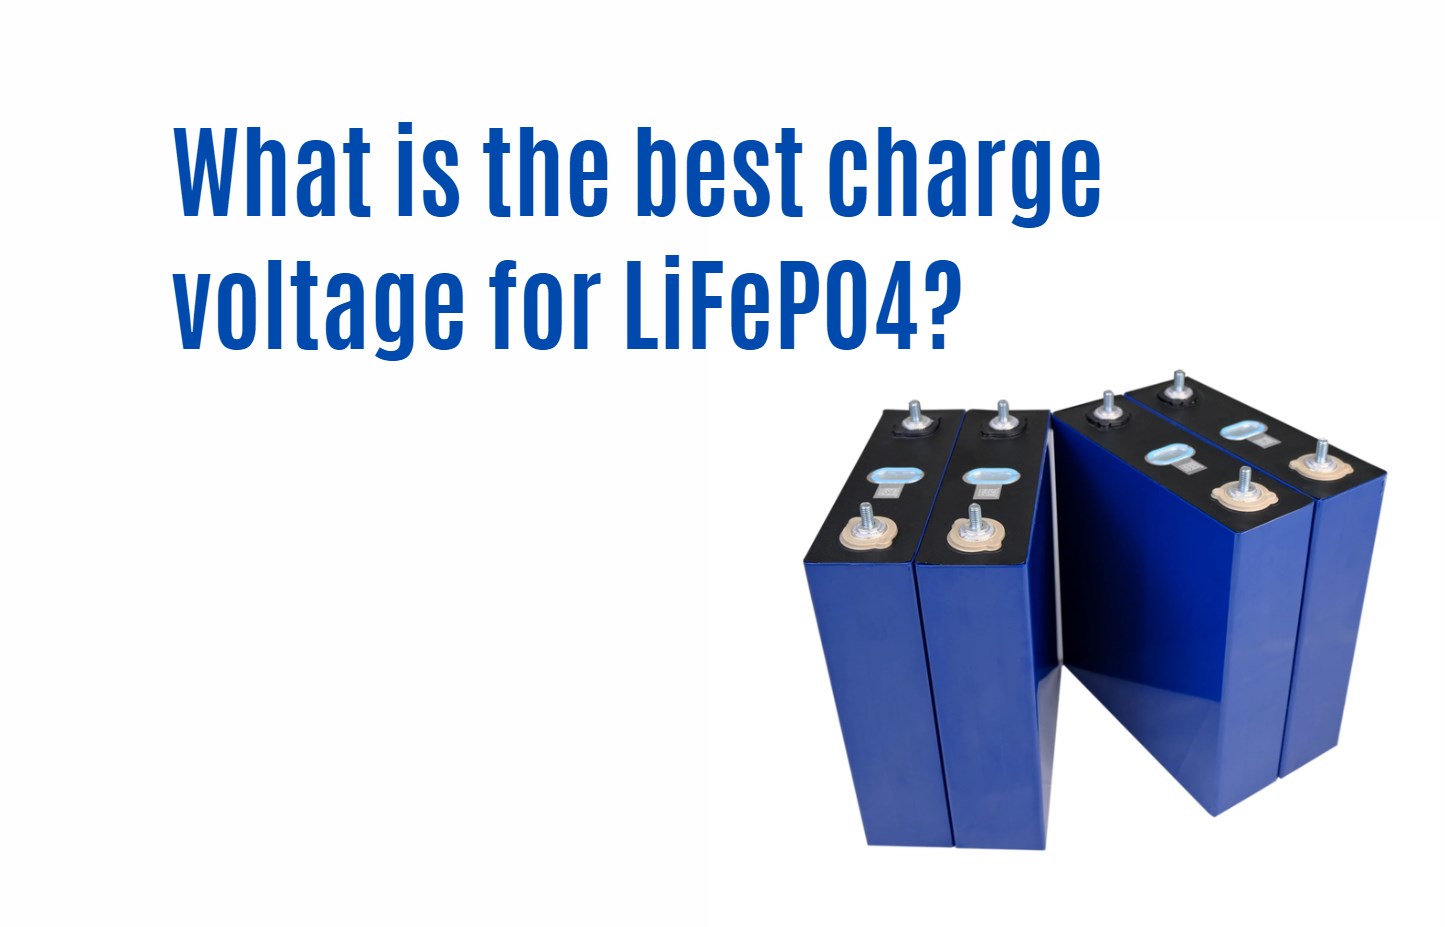 What is the best charge voltage for LiFePO4?